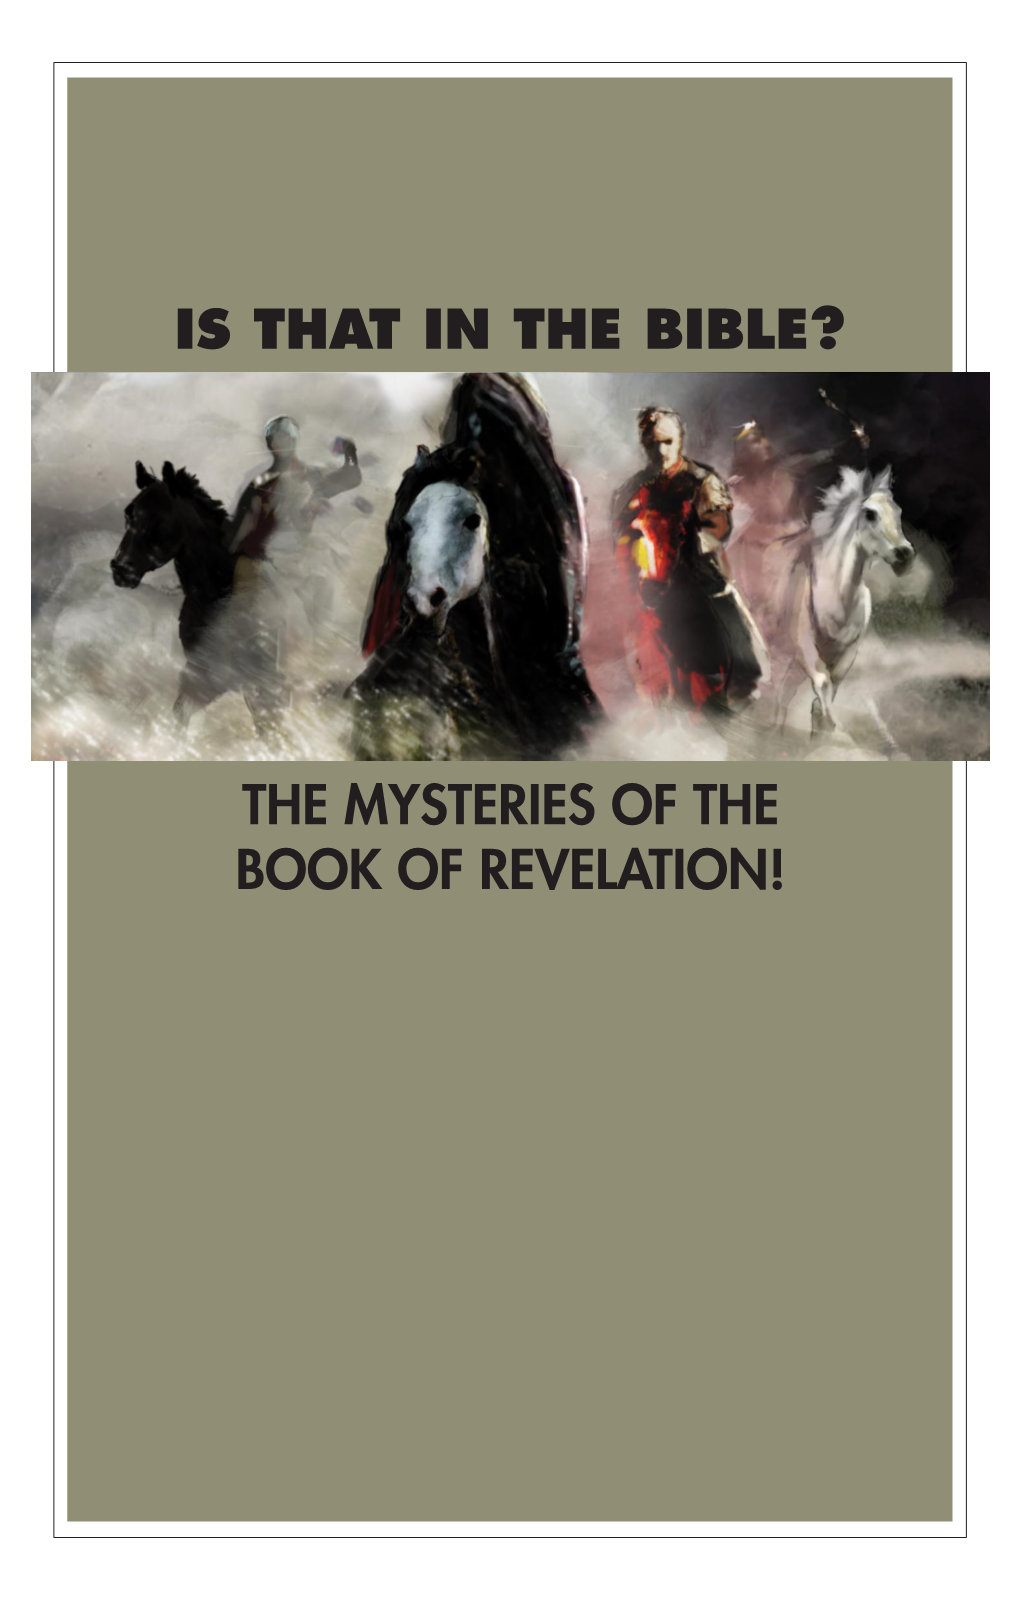 Is That in the Bible? the Mysteries of the Book of Revelation! 1 2 Is That in the Bible? the Mysteries of the Book of Revelation! Introduction